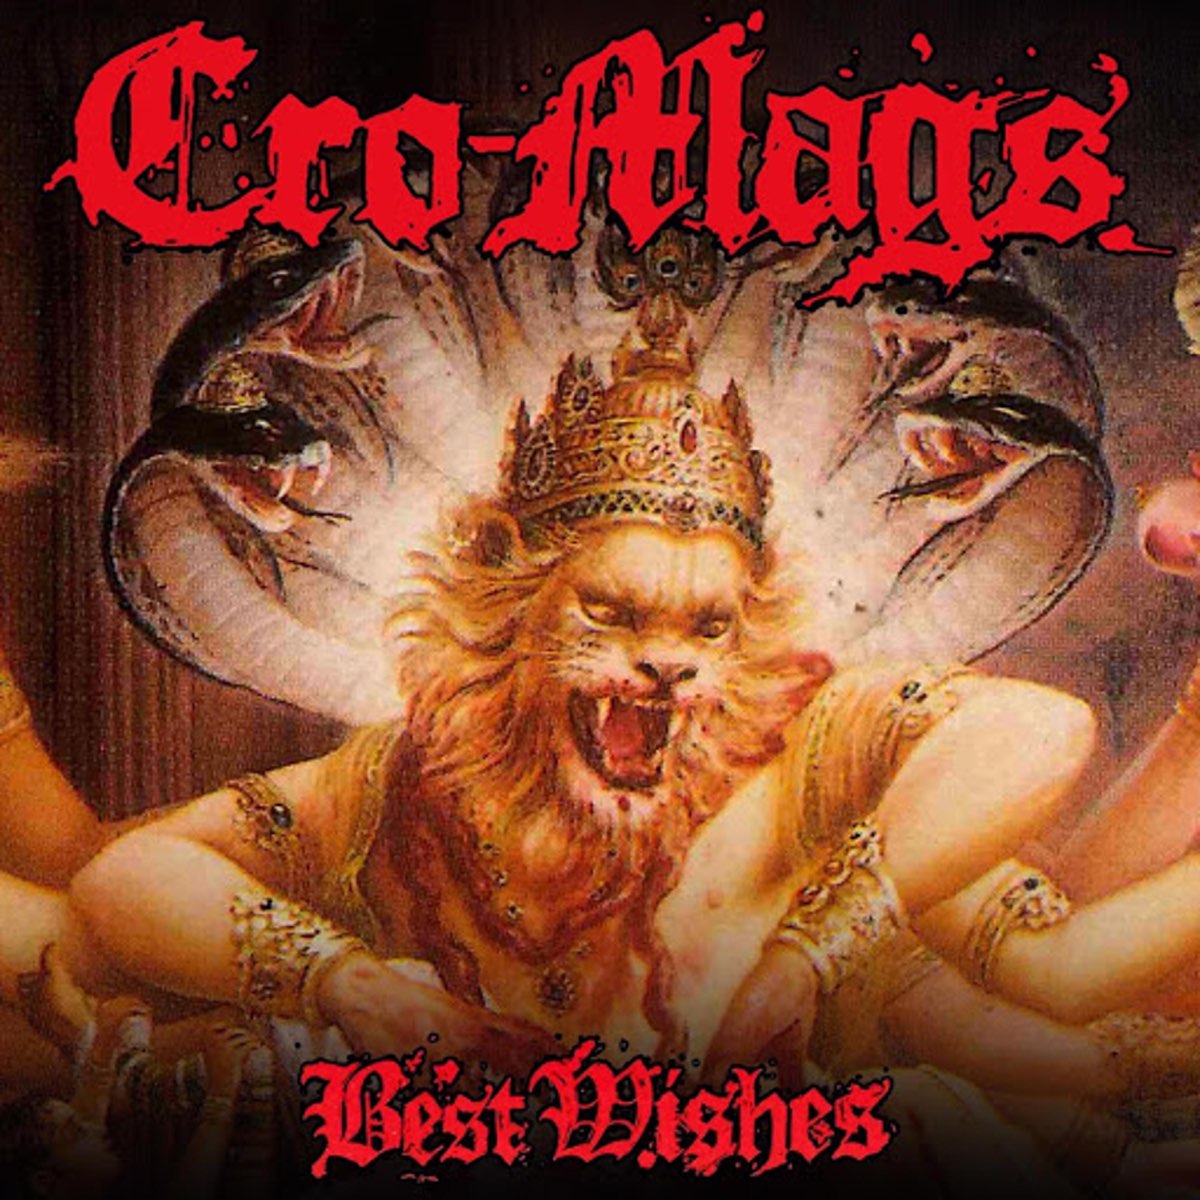 ‎Best Wishes - Album by Cro-Mags - Apple Music